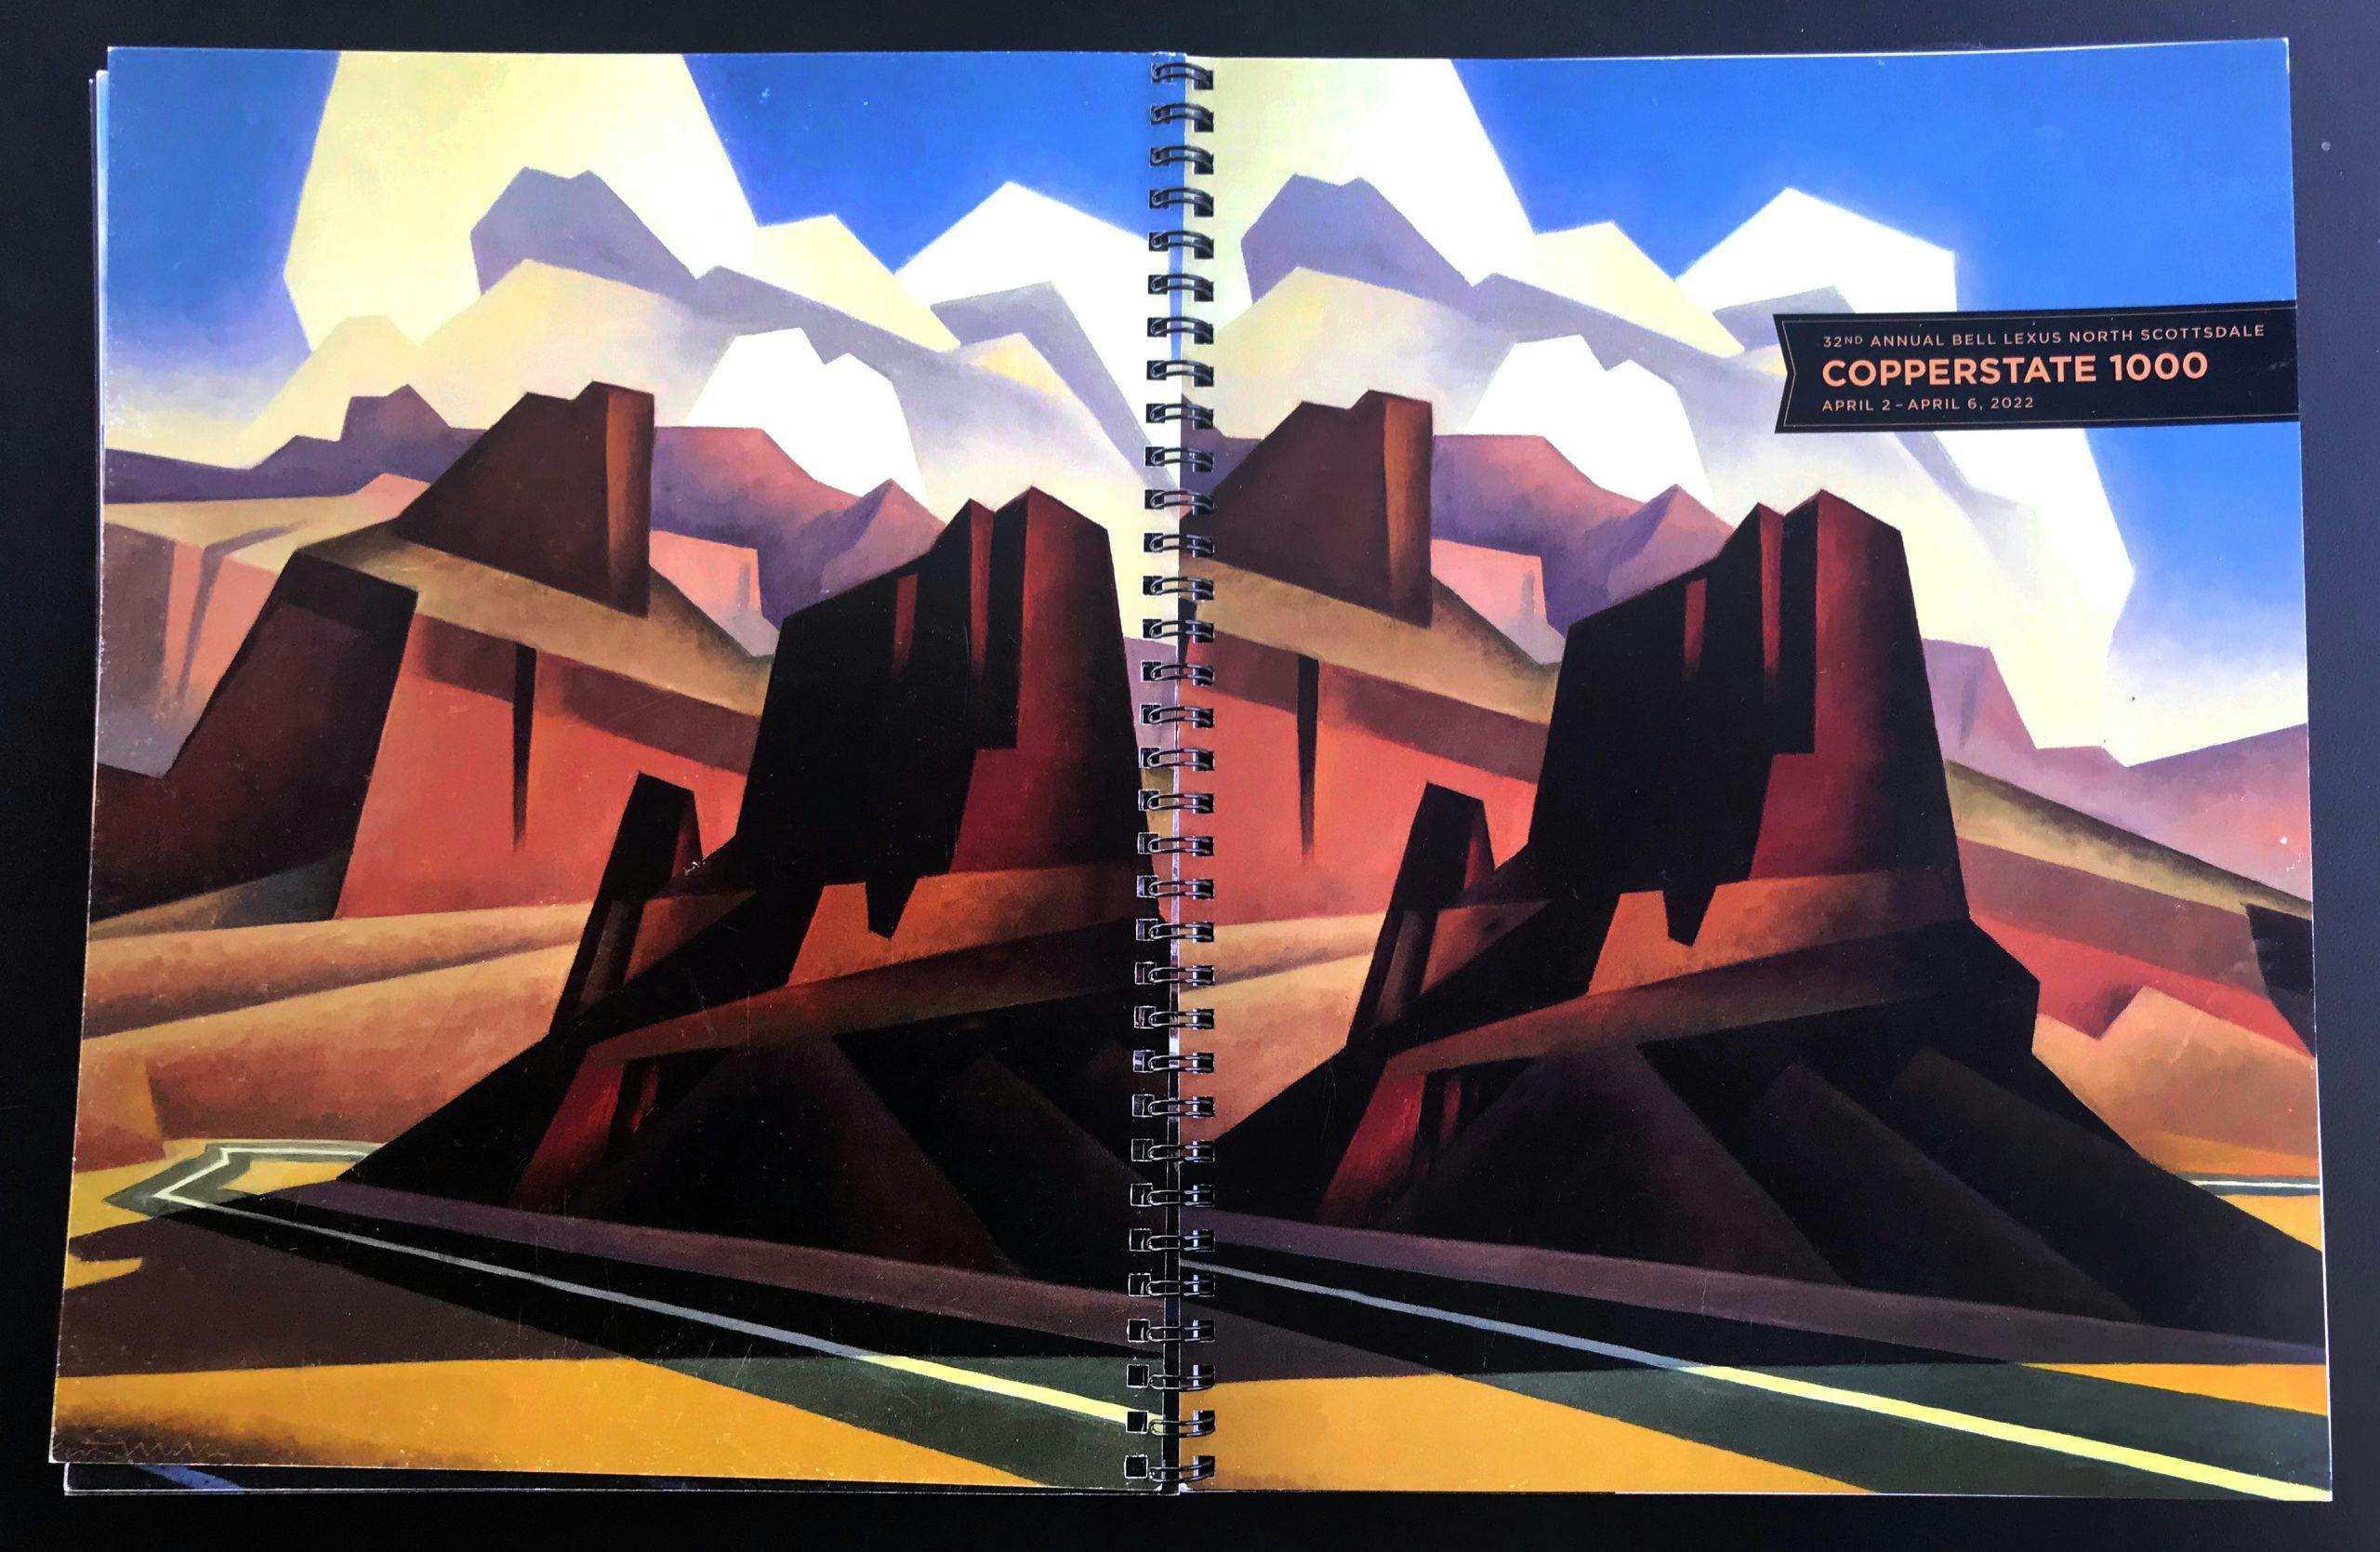 Copperstate 500 route book covers